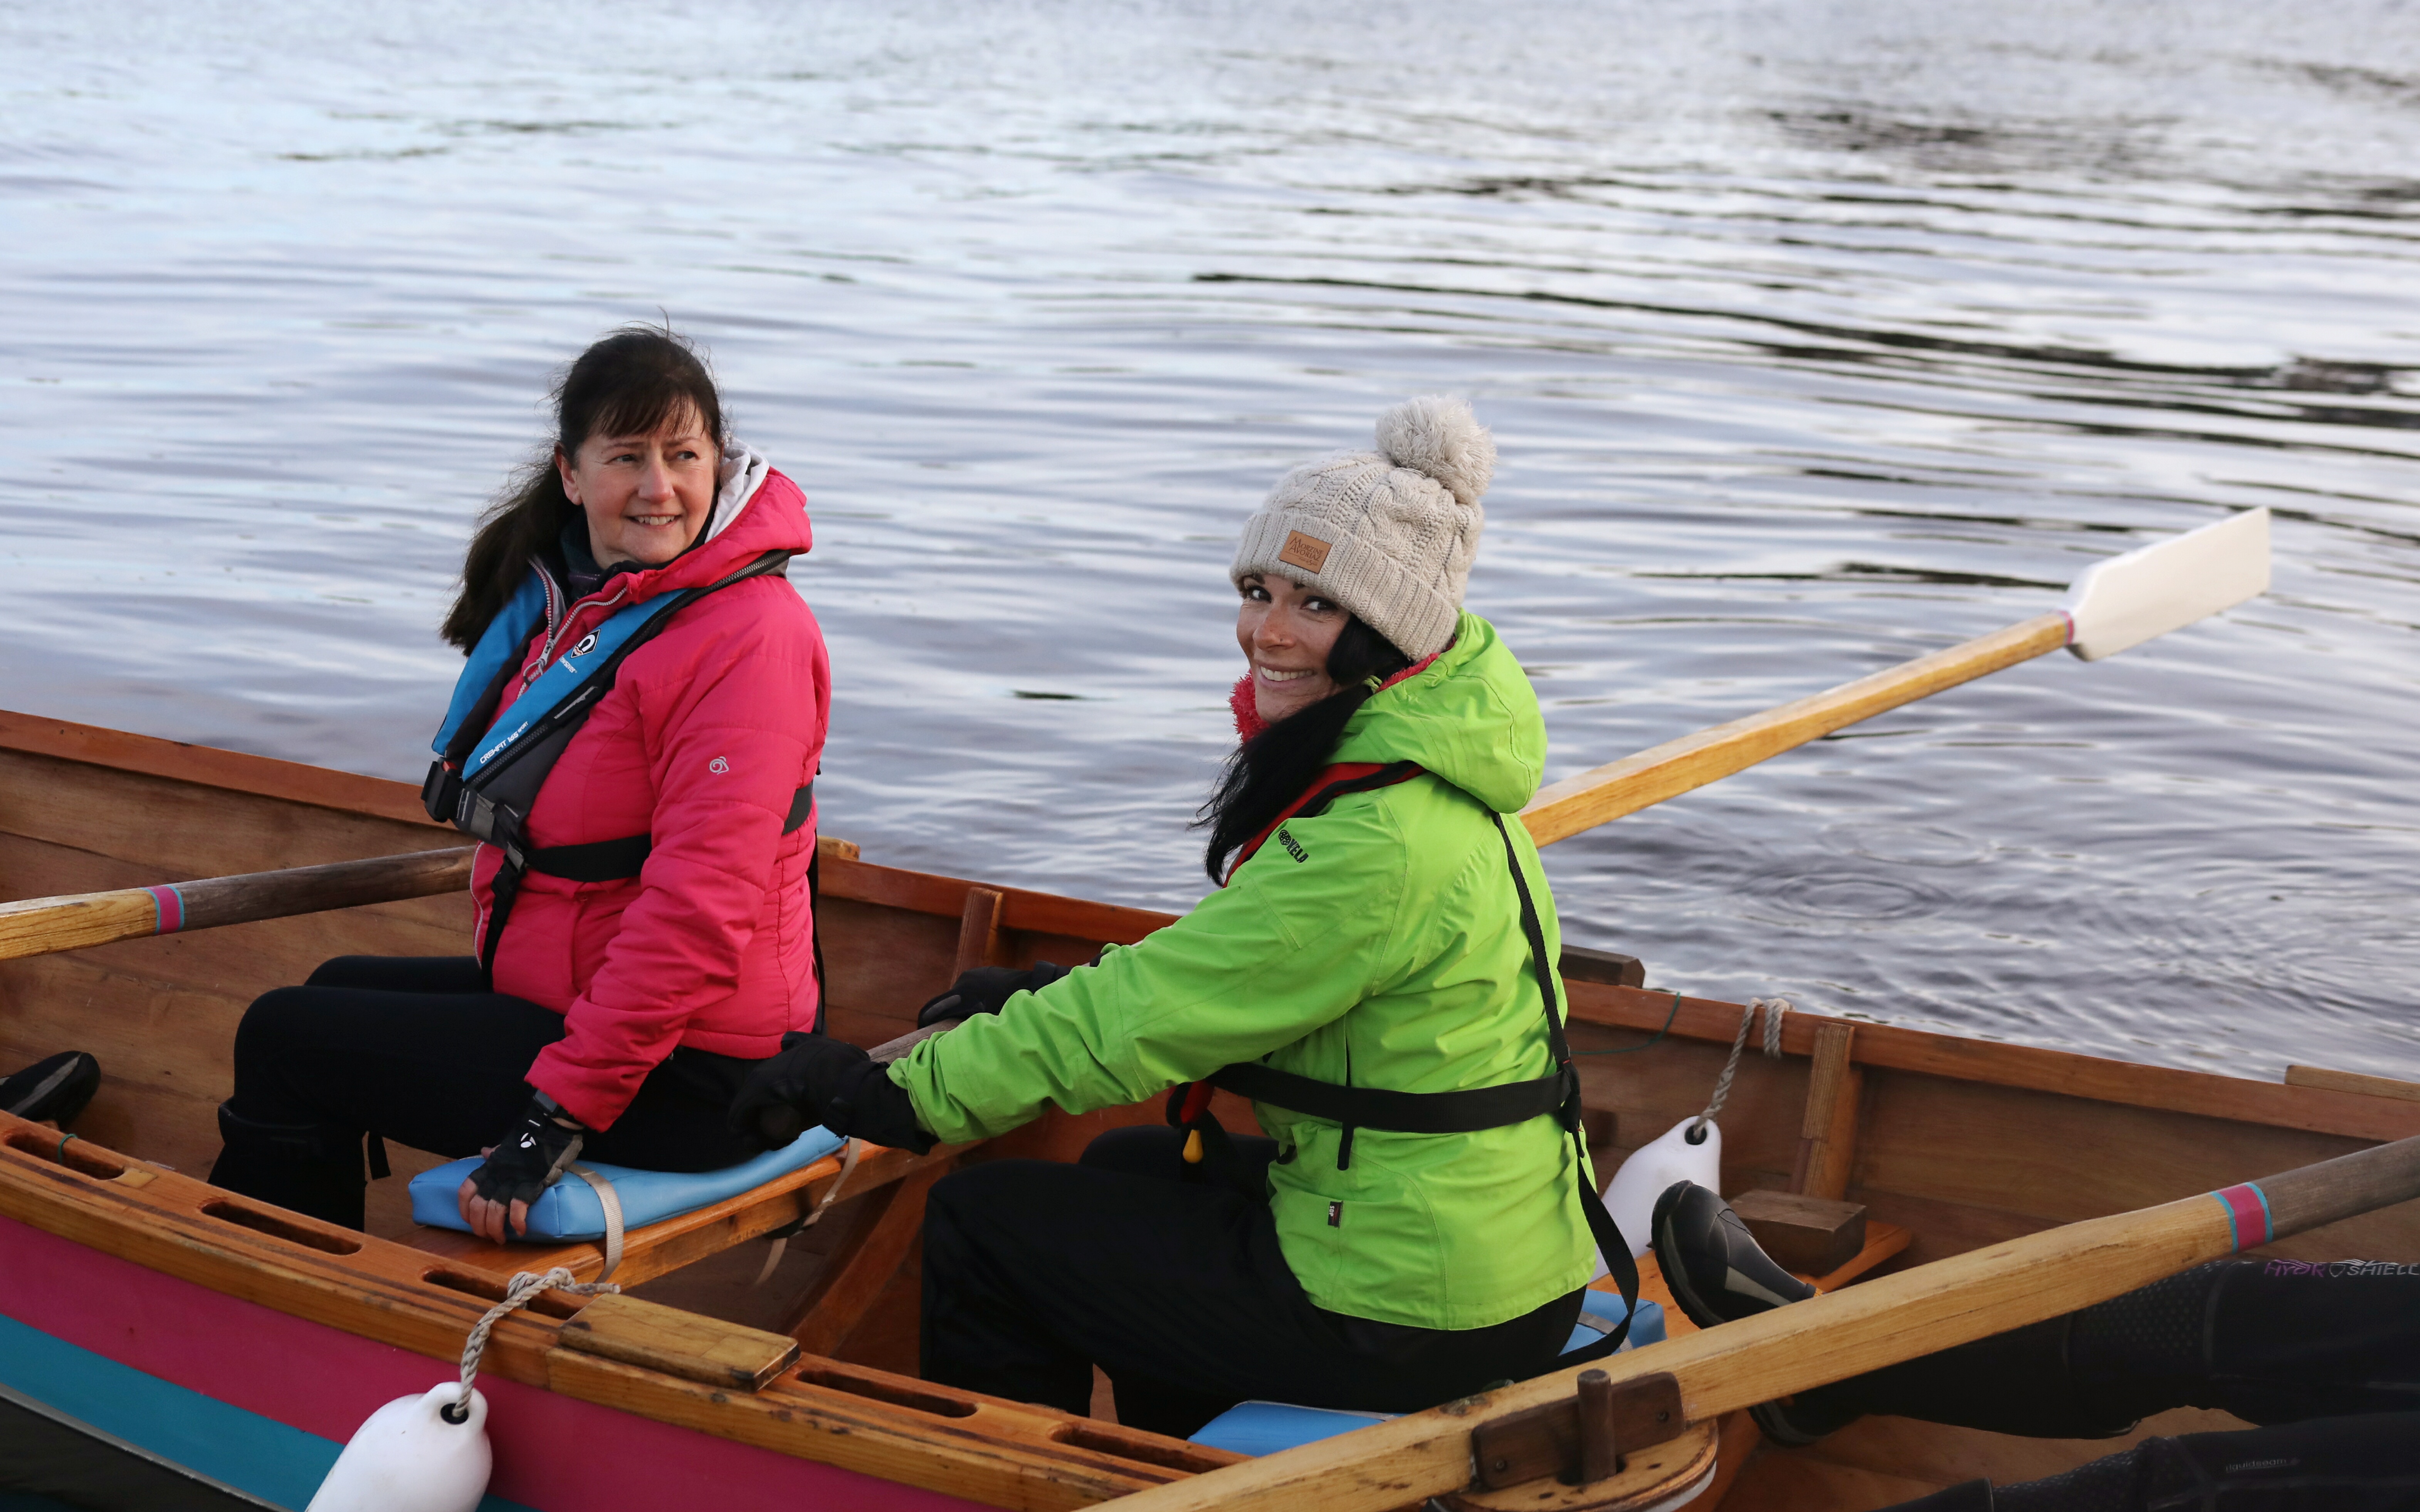 Gayle out coastal rowing on the Tay with Wormit Boating Club. Here, she poses up for pictures with Evelyn Hardie.